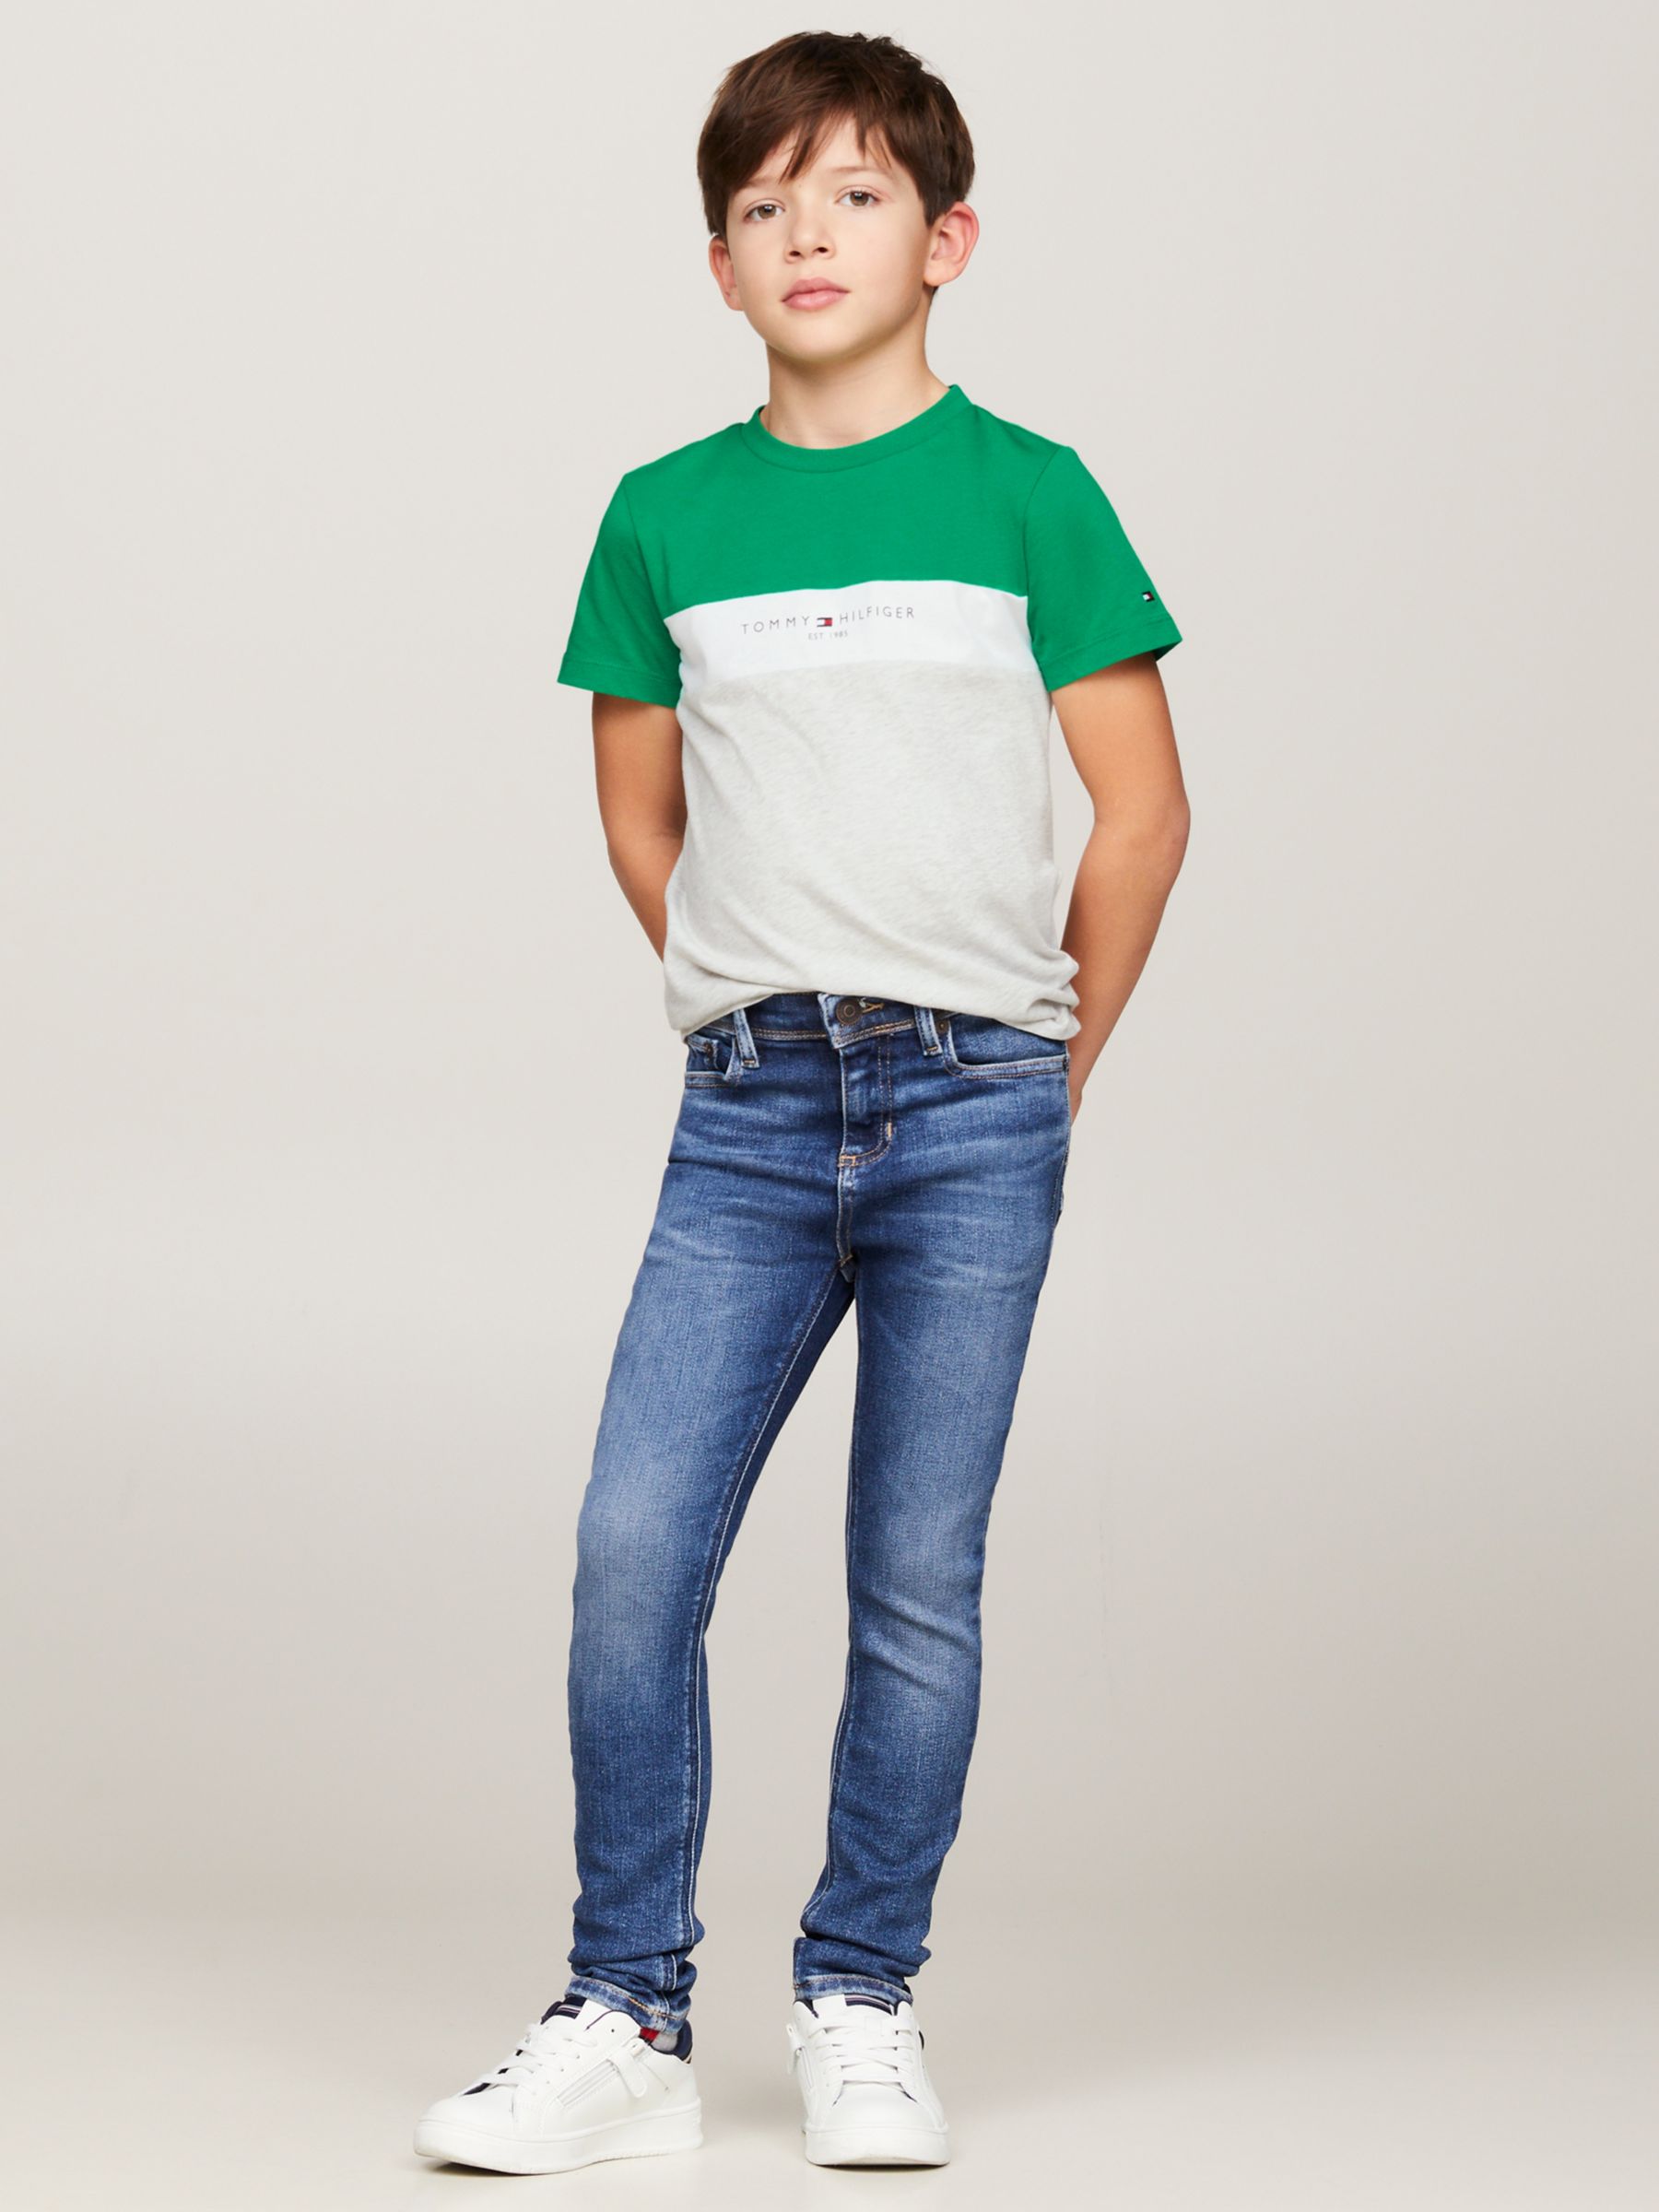 Tommy Hilfiger Kids' Logo Colour Block T-Shirt, Olympic Green, 3 years